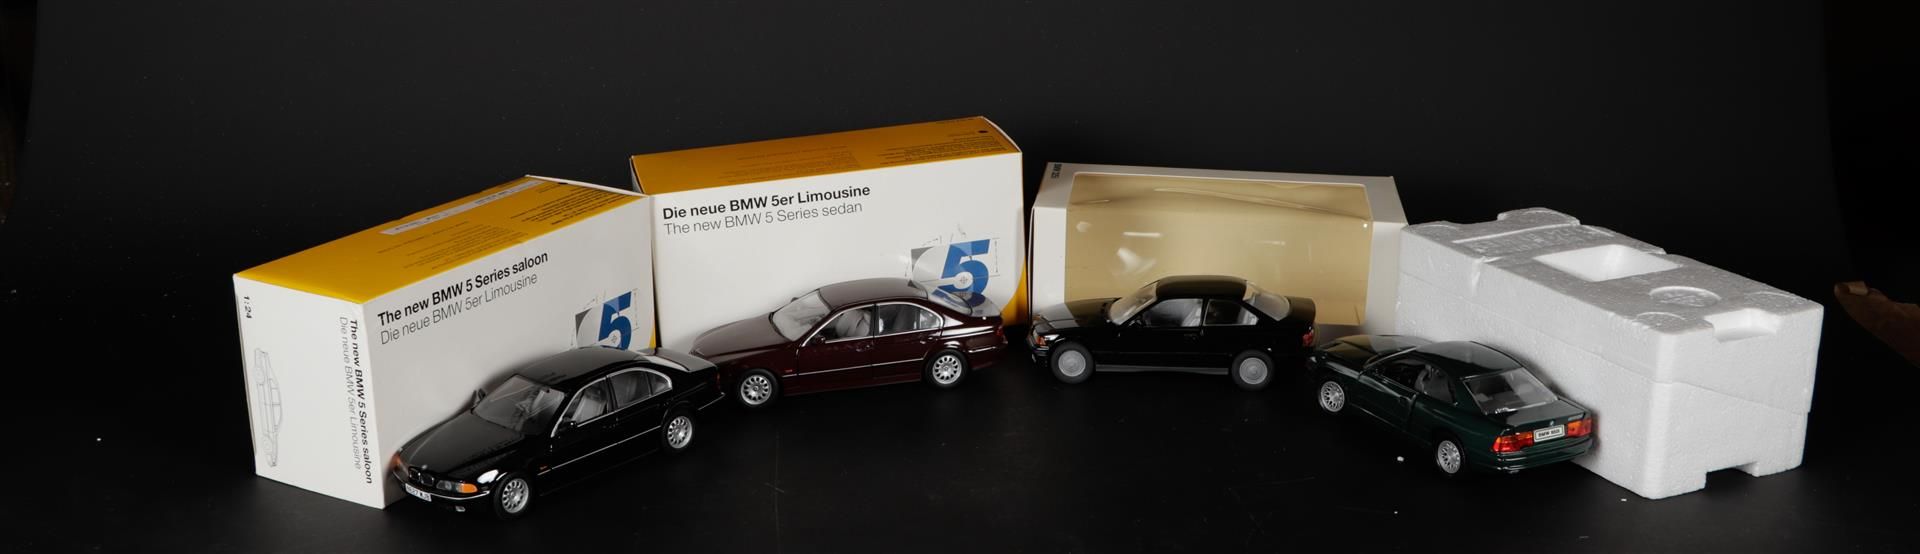 A lot of 4 model cars consisting of a BMW 850i, 5er limosin